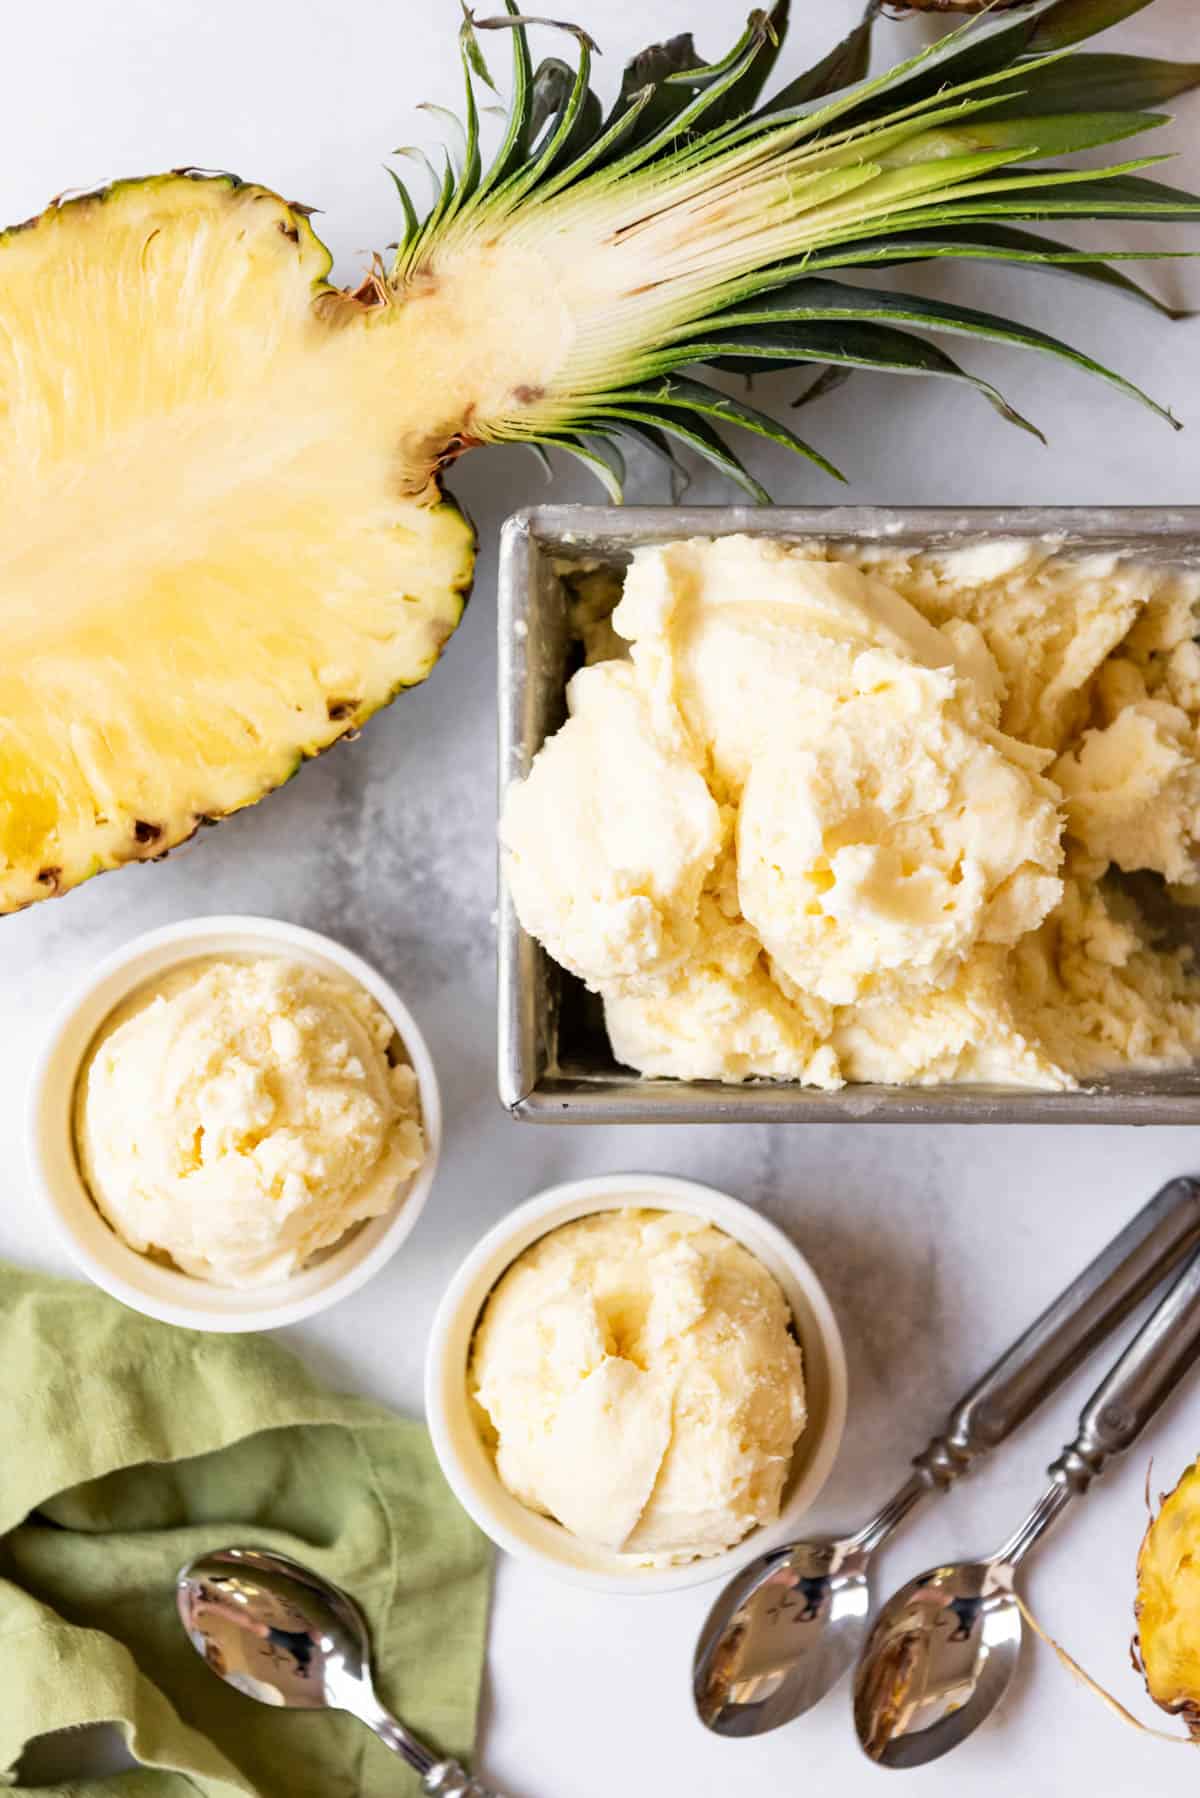 Scoops of fresh pineapple ice cream in bowls next to the container of homemade ice cream.